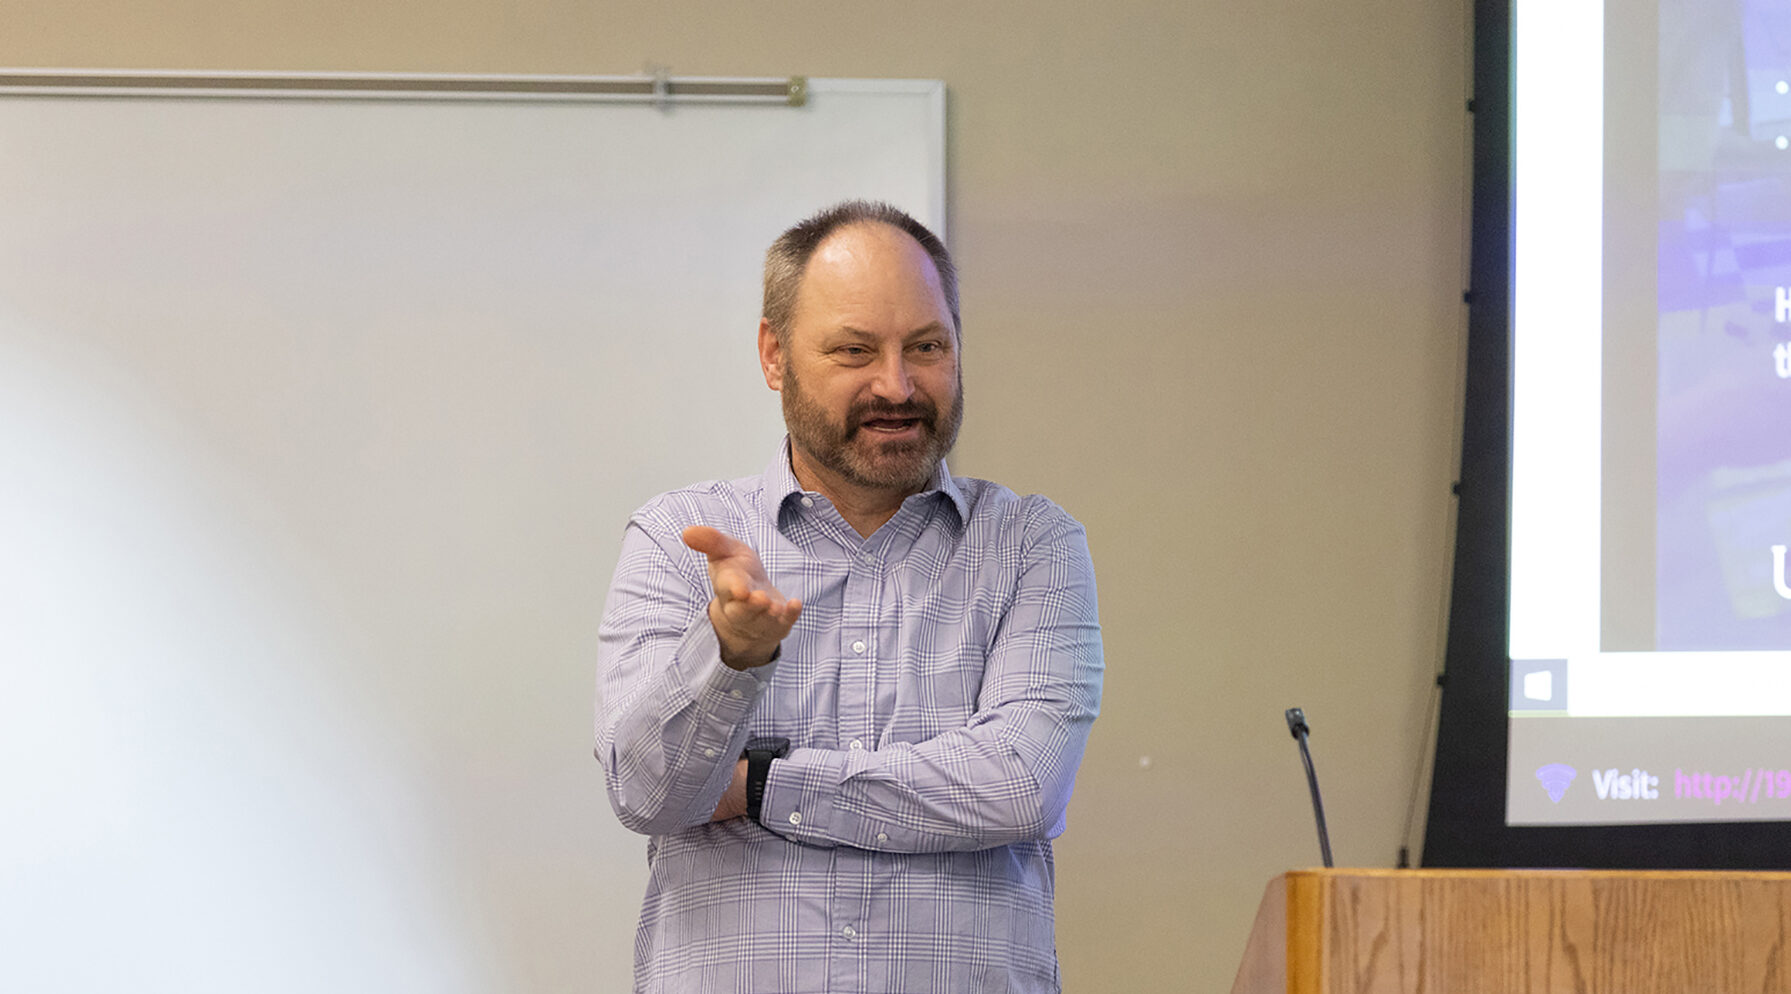 Photo of Ted Theyerl, an engineer and Lean facilitator with UW-Stout’s Manufacturing Outreach Center, who envisioned Buzz Digital during the pandemic after watching his son play a video game. / UW-Stout